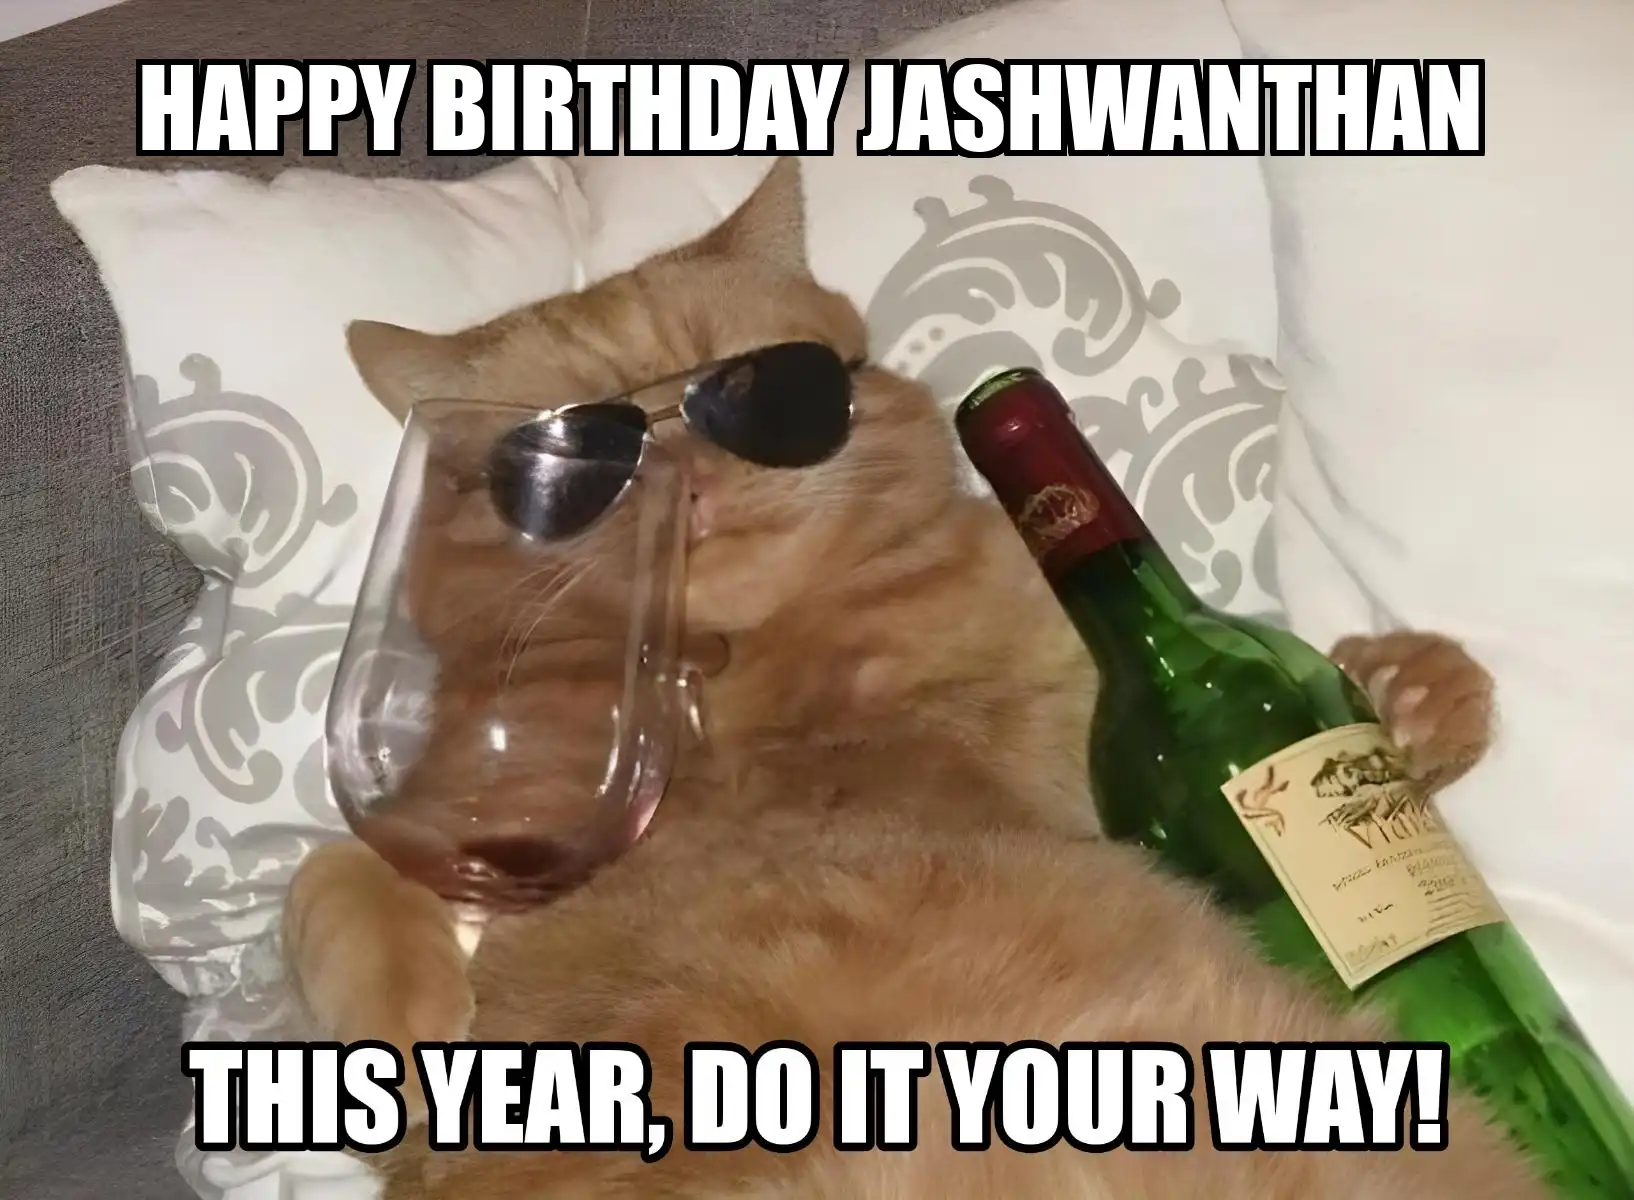 Happy Birthday Jashwanthan This Year Do It Your Way Meme